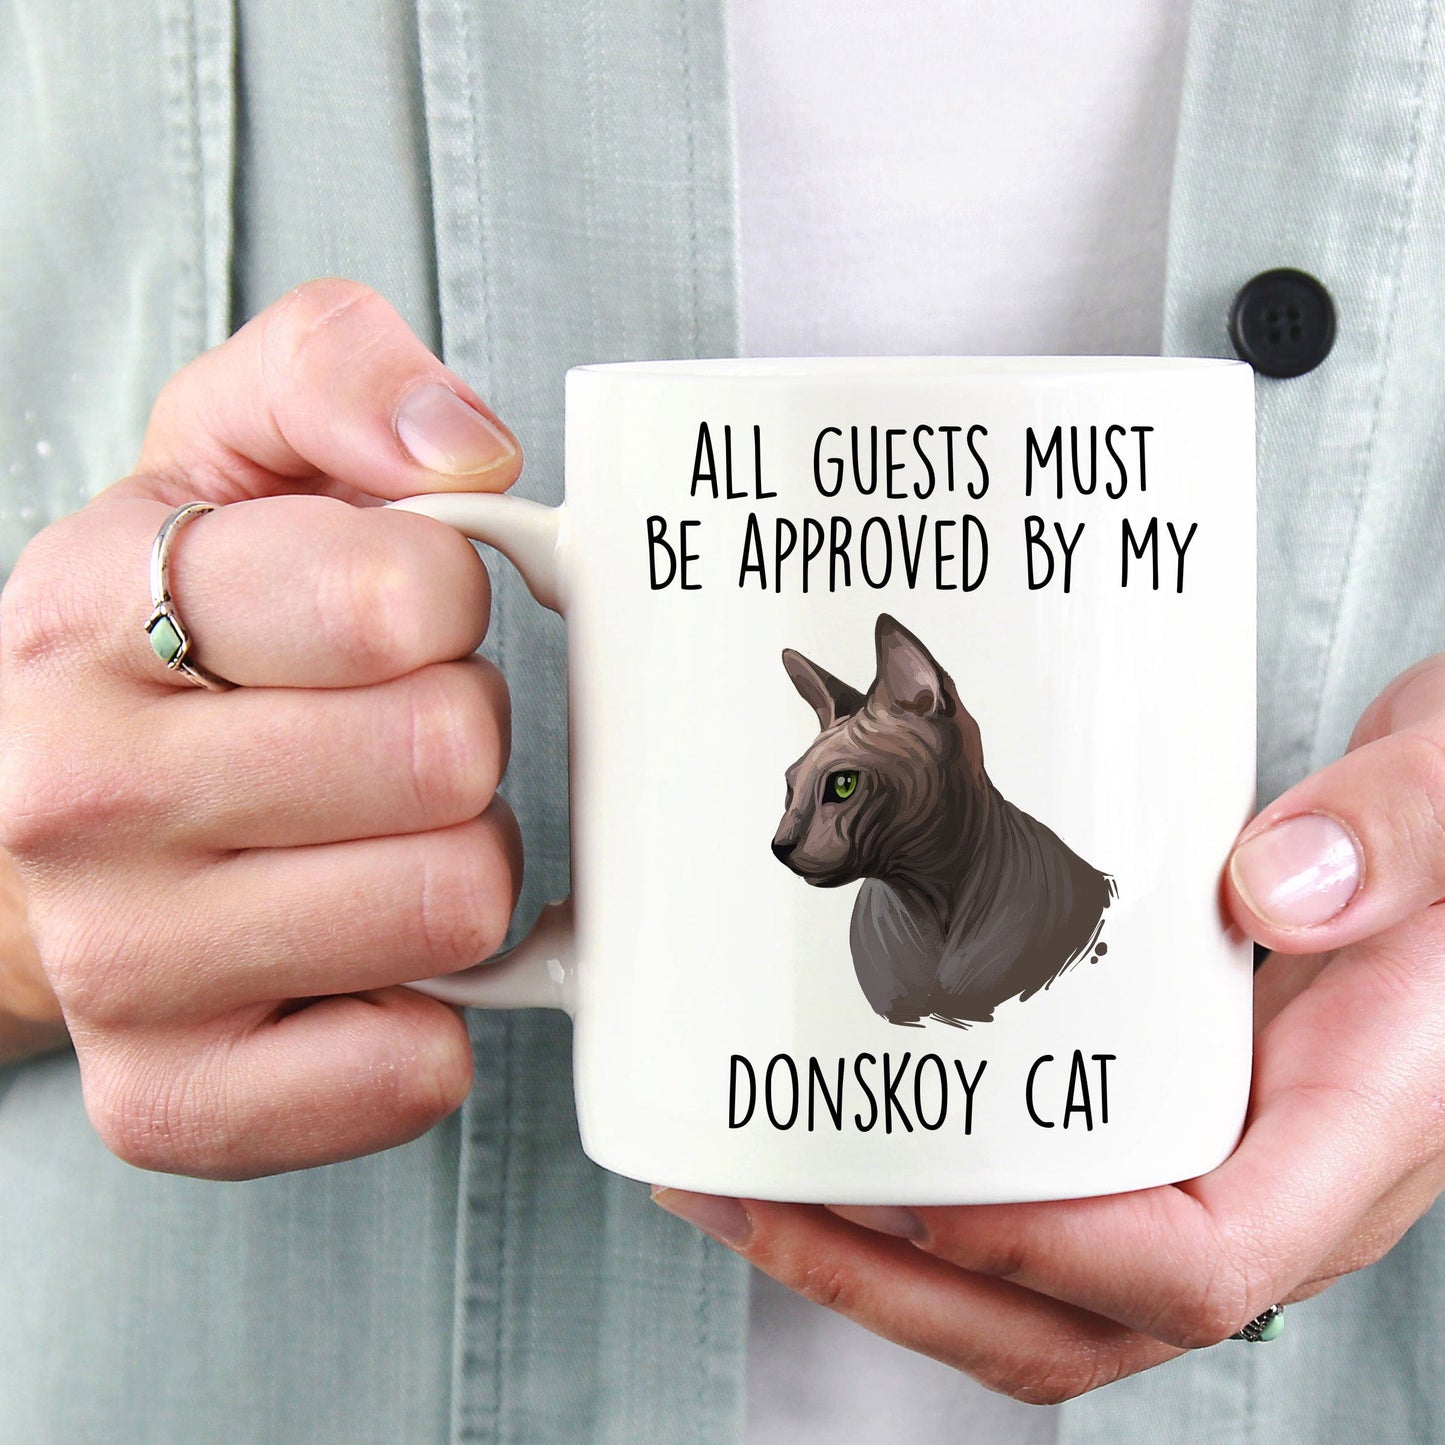 Donskoy Cat Funny Coffee Mug - All Guests Must Be Approved